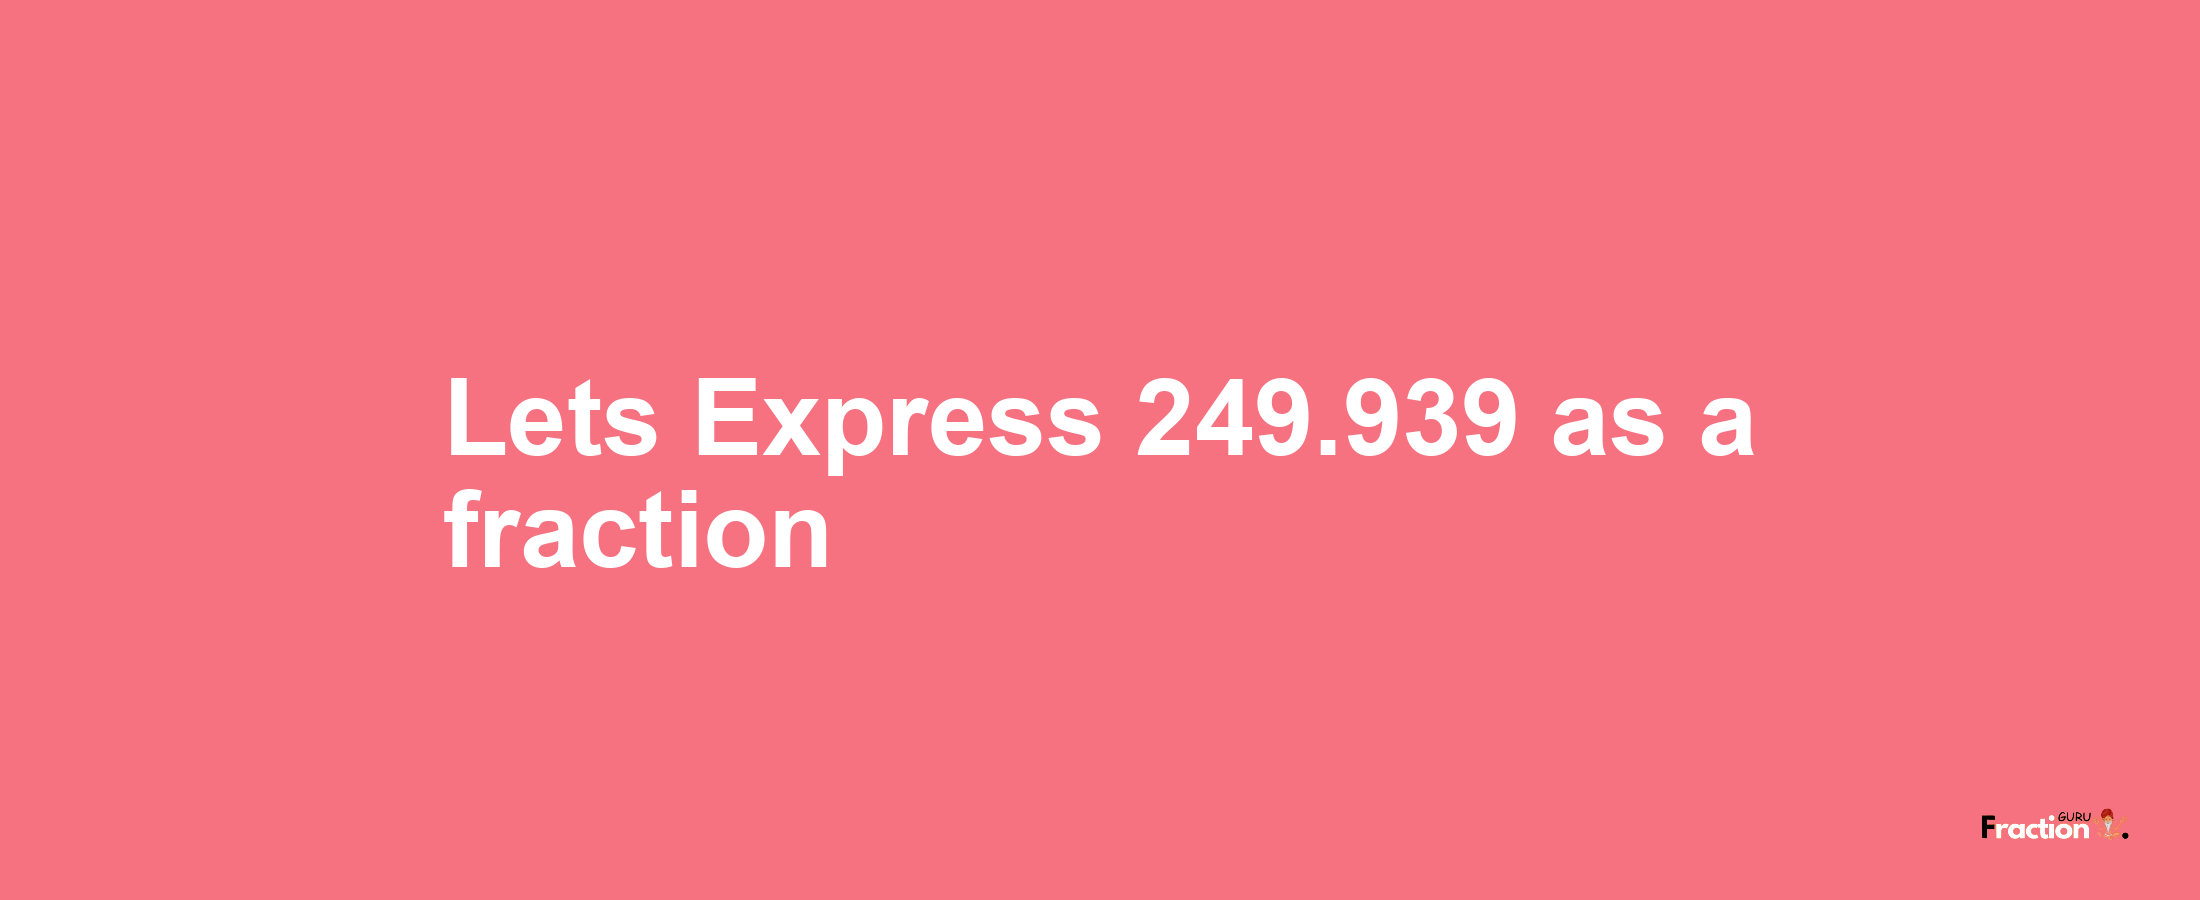 Lets Express 249.939 as afraction